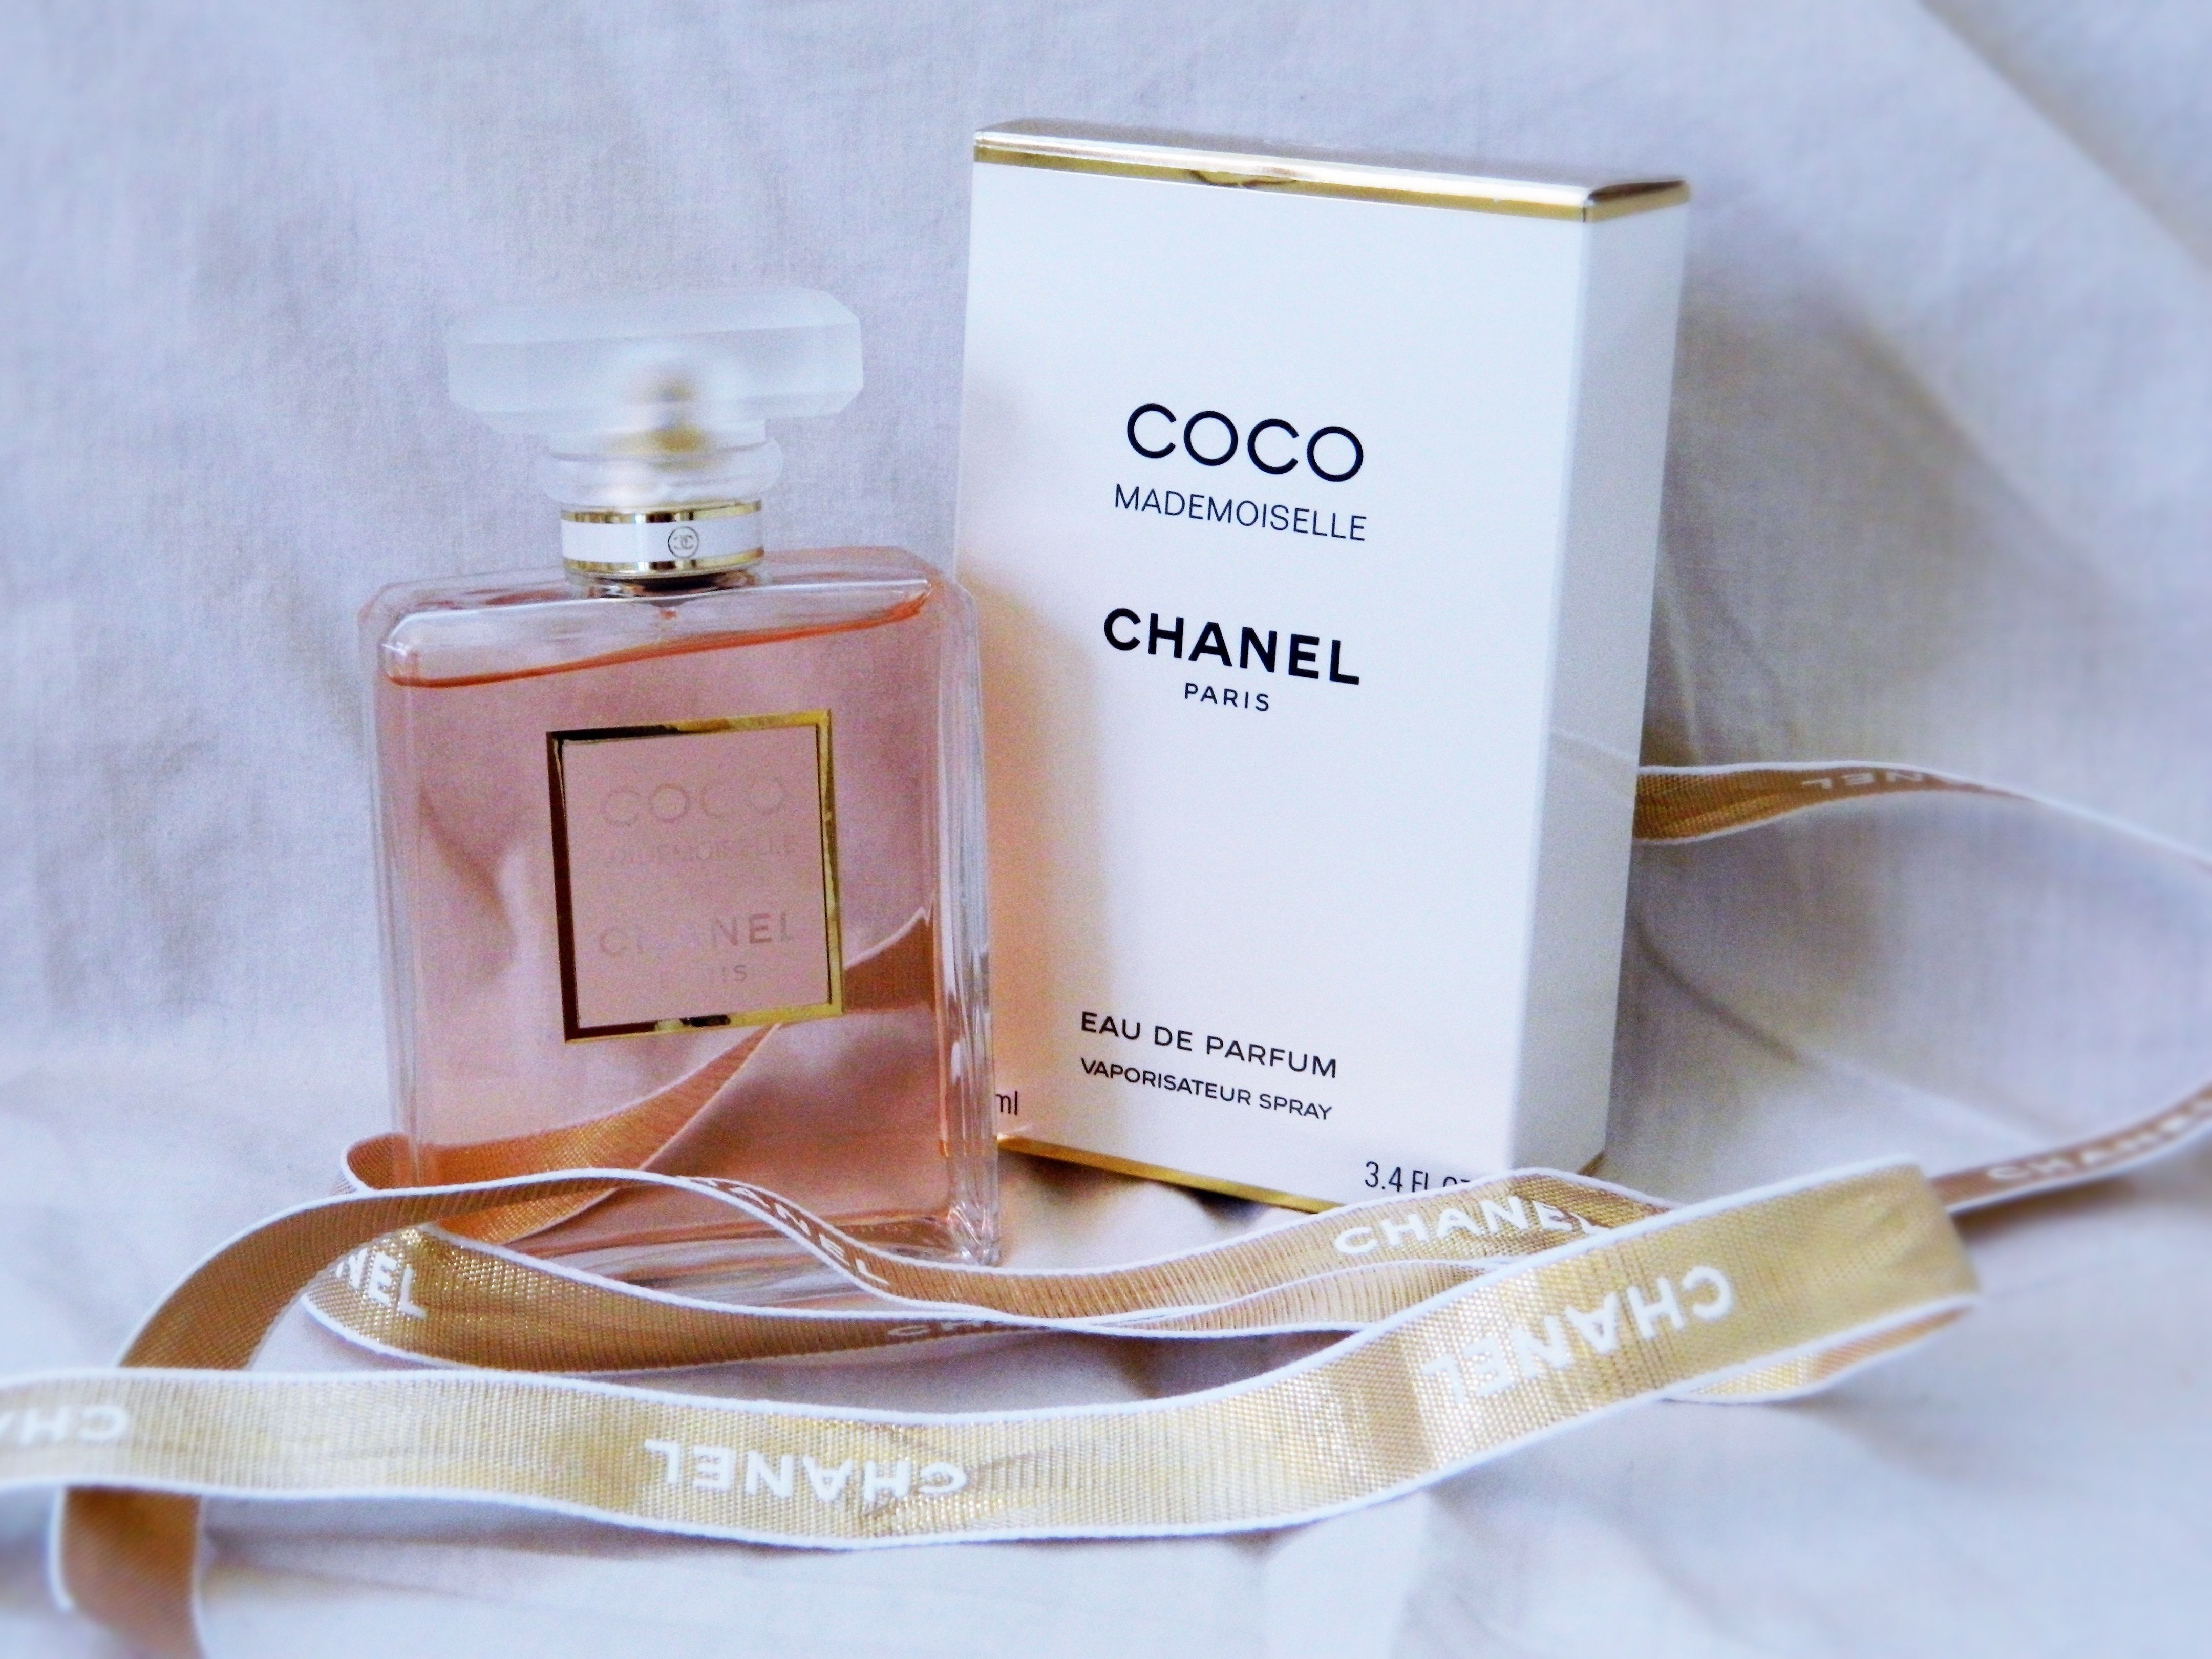 1. Chanel Coco Mademoiselle EDT 50ml (l)